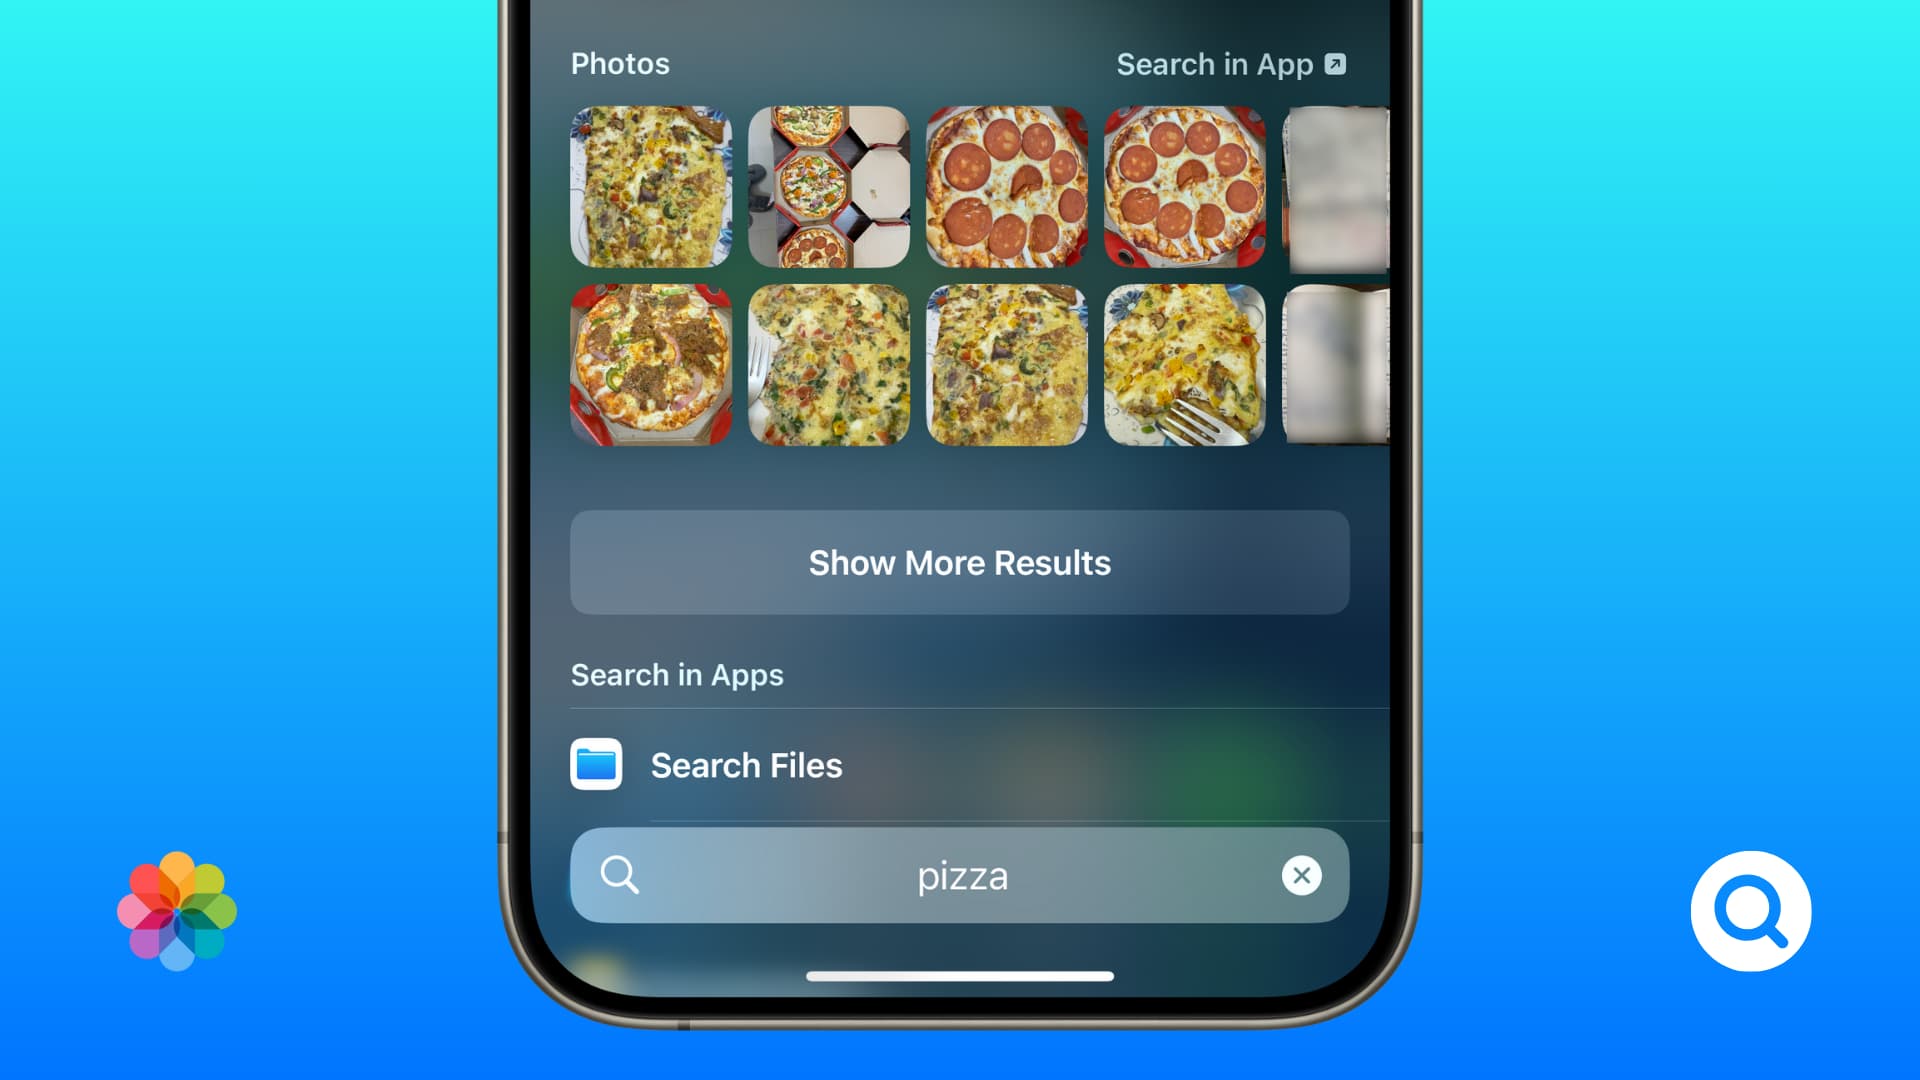 Pizza photos in iPhone Spotlight Search